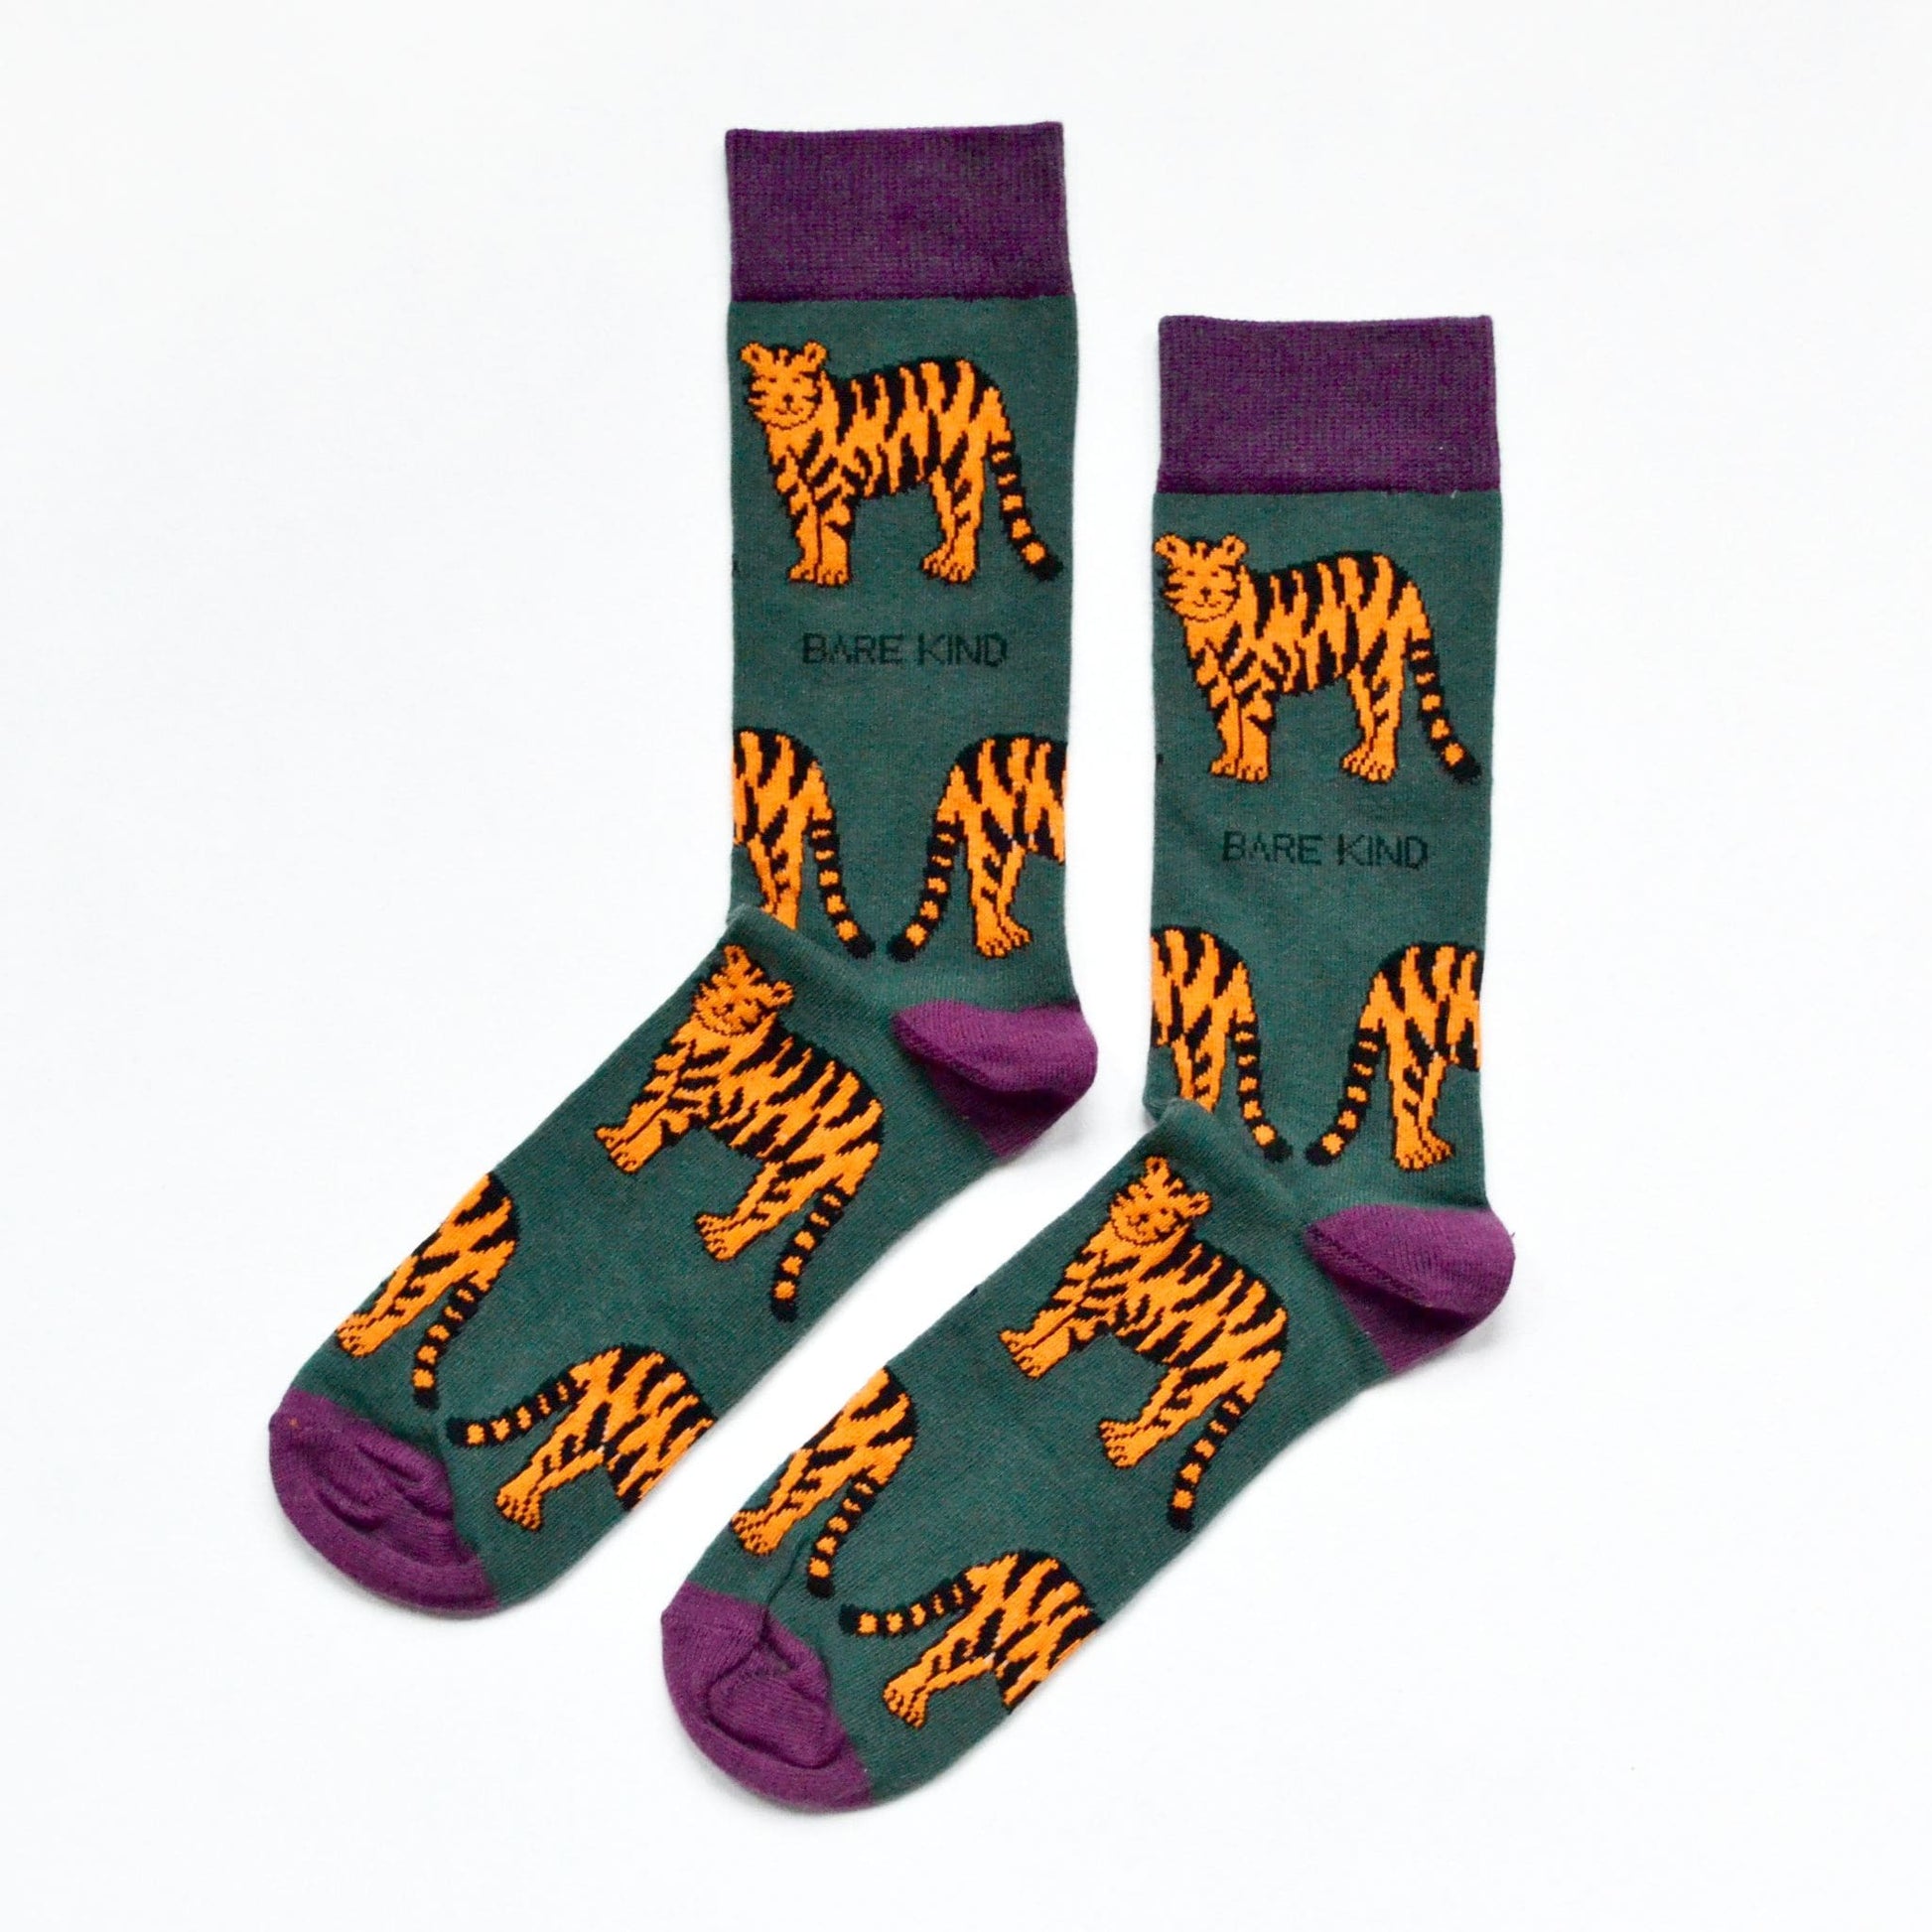 Socks Protecting Tigers - Sustainable Bamboo Socks in 2 Adult Sizes